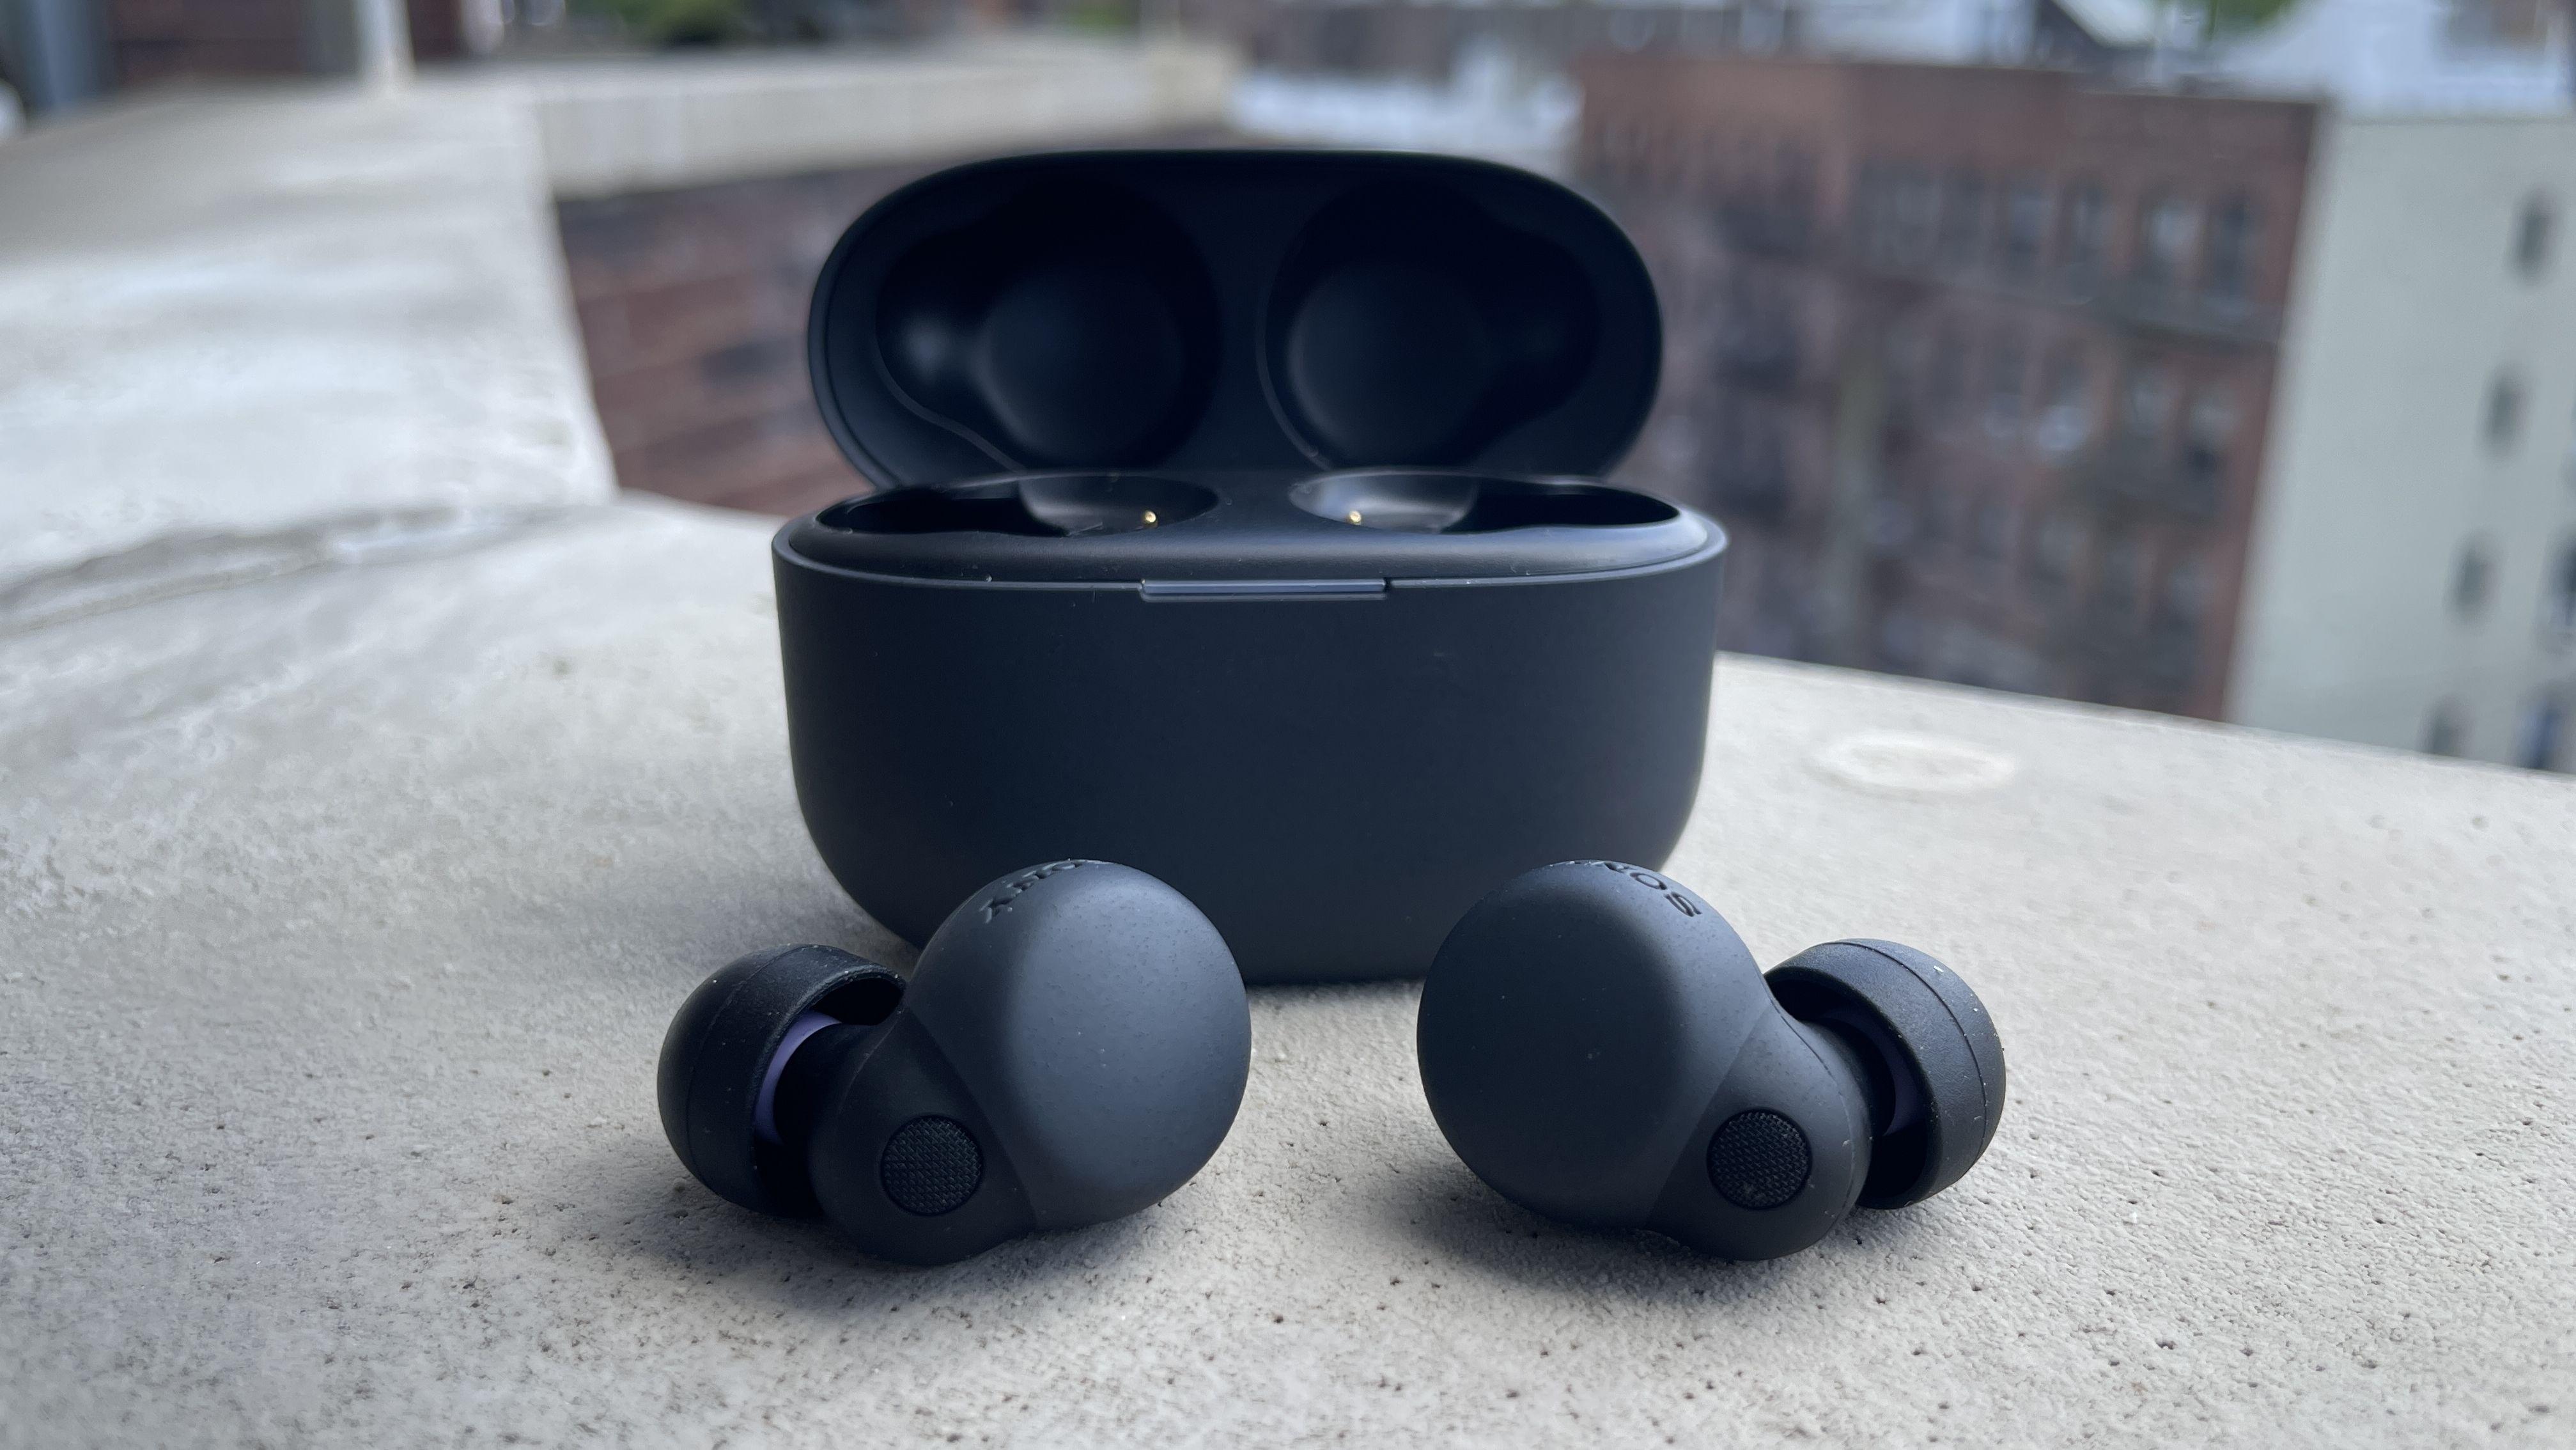 Sony LinkBuds S on : TWS earphones with ANC, LDAC codec, and up to 20  hours of battery life for the promo price of $128 ($71 off)